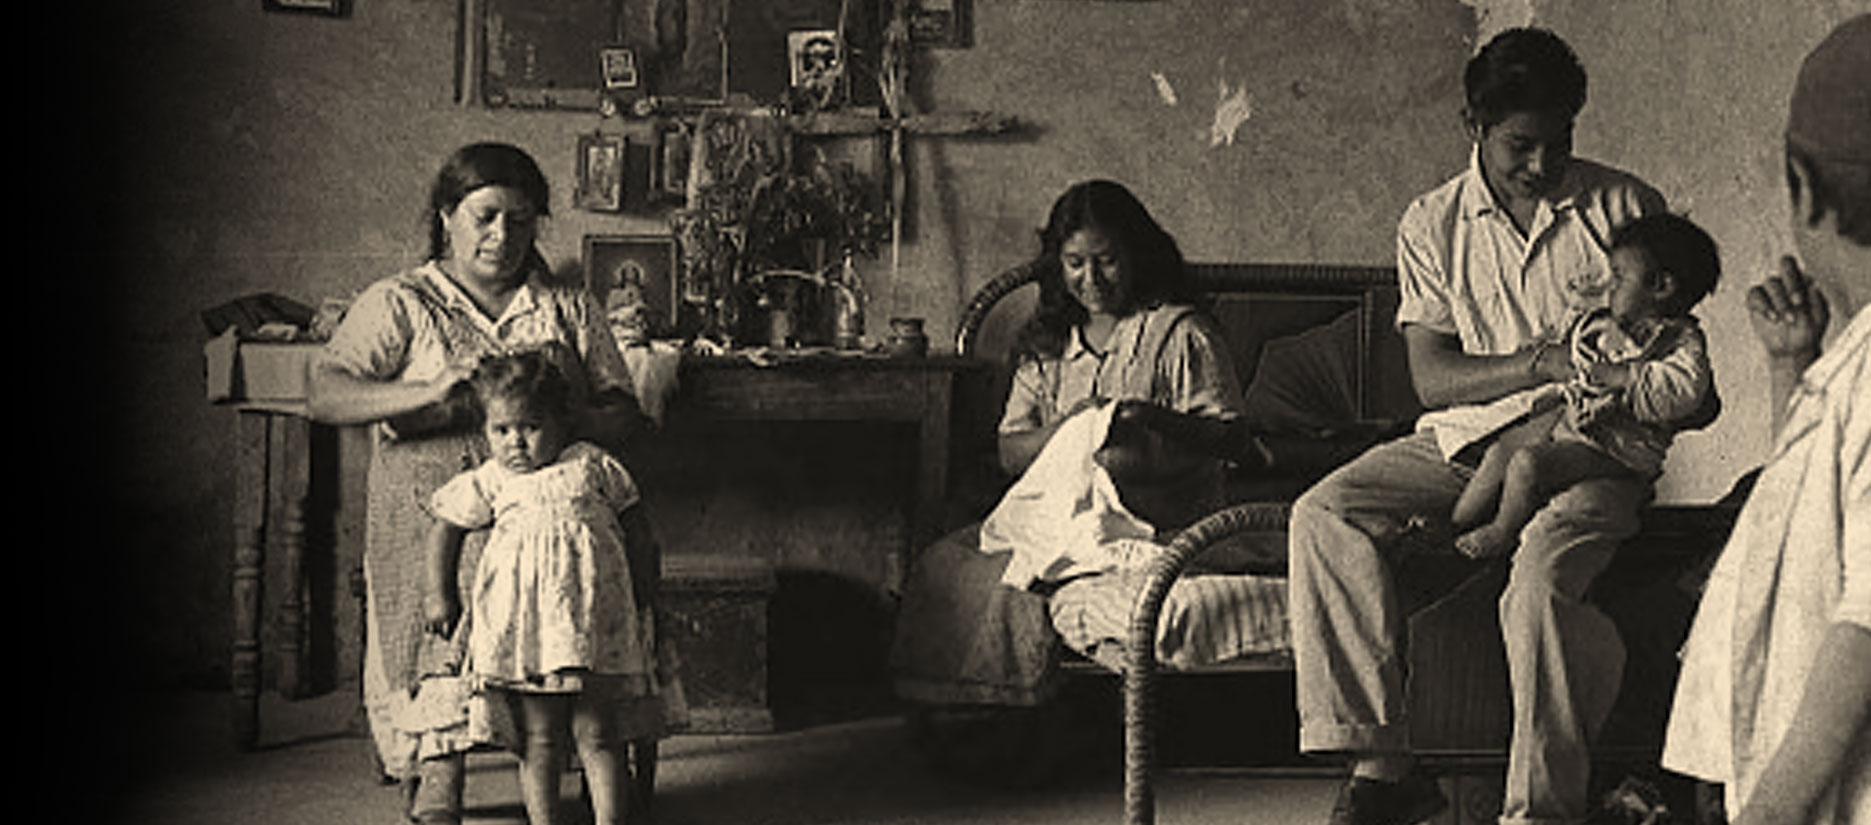 A Bracero family spends time together in their off hours